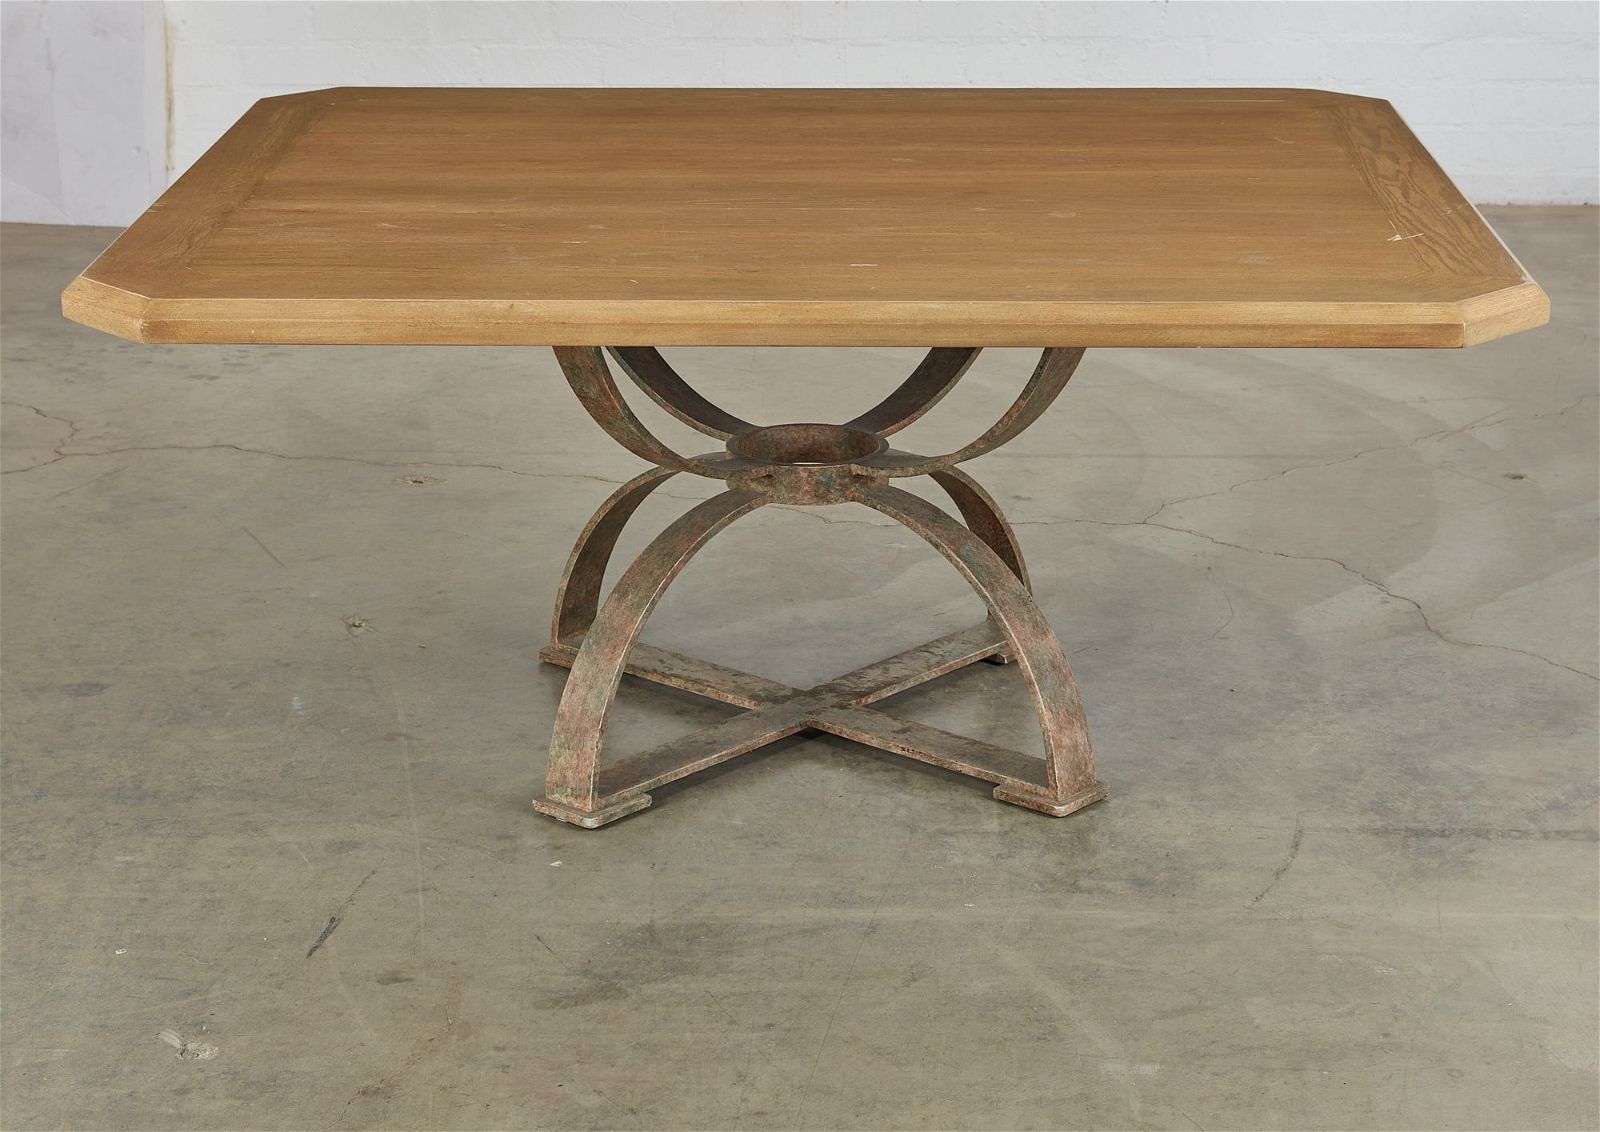 A PAINTED METAL AND OAK TABLE,